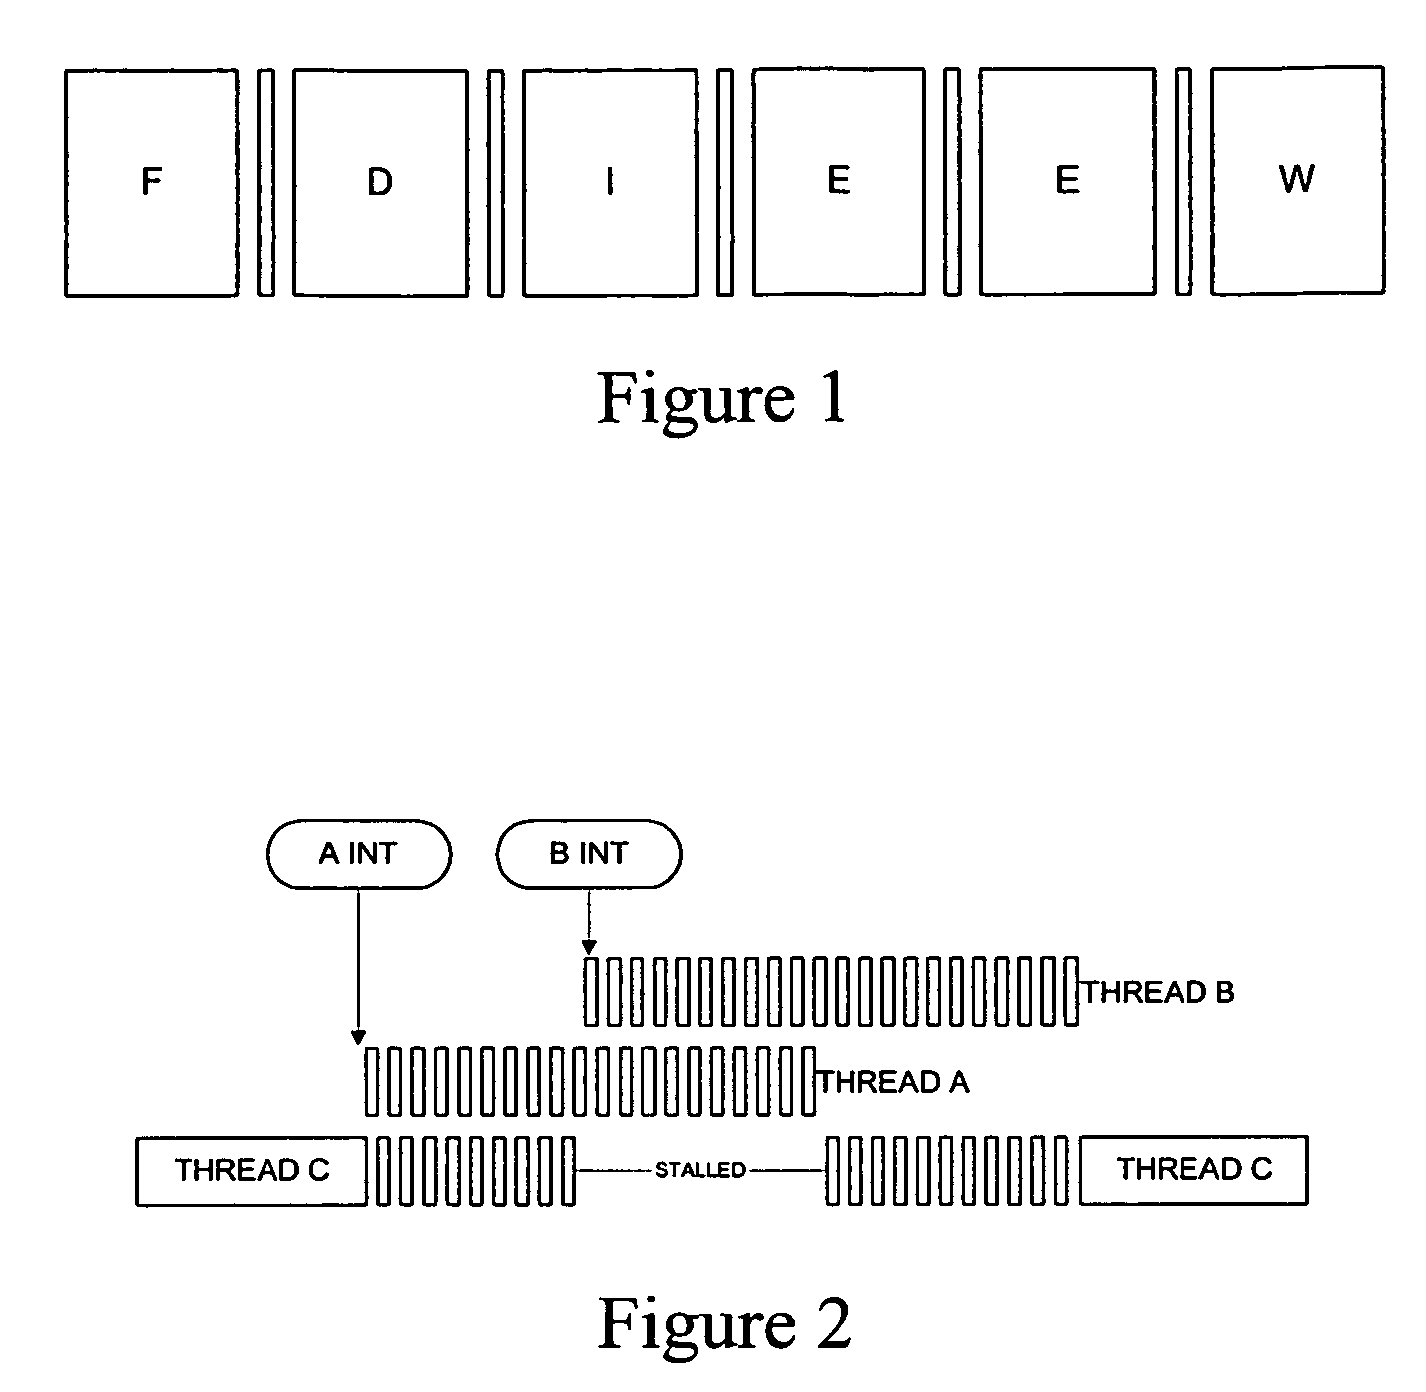 System and method for reading and writing a thread state in a multithreaded central processing unit